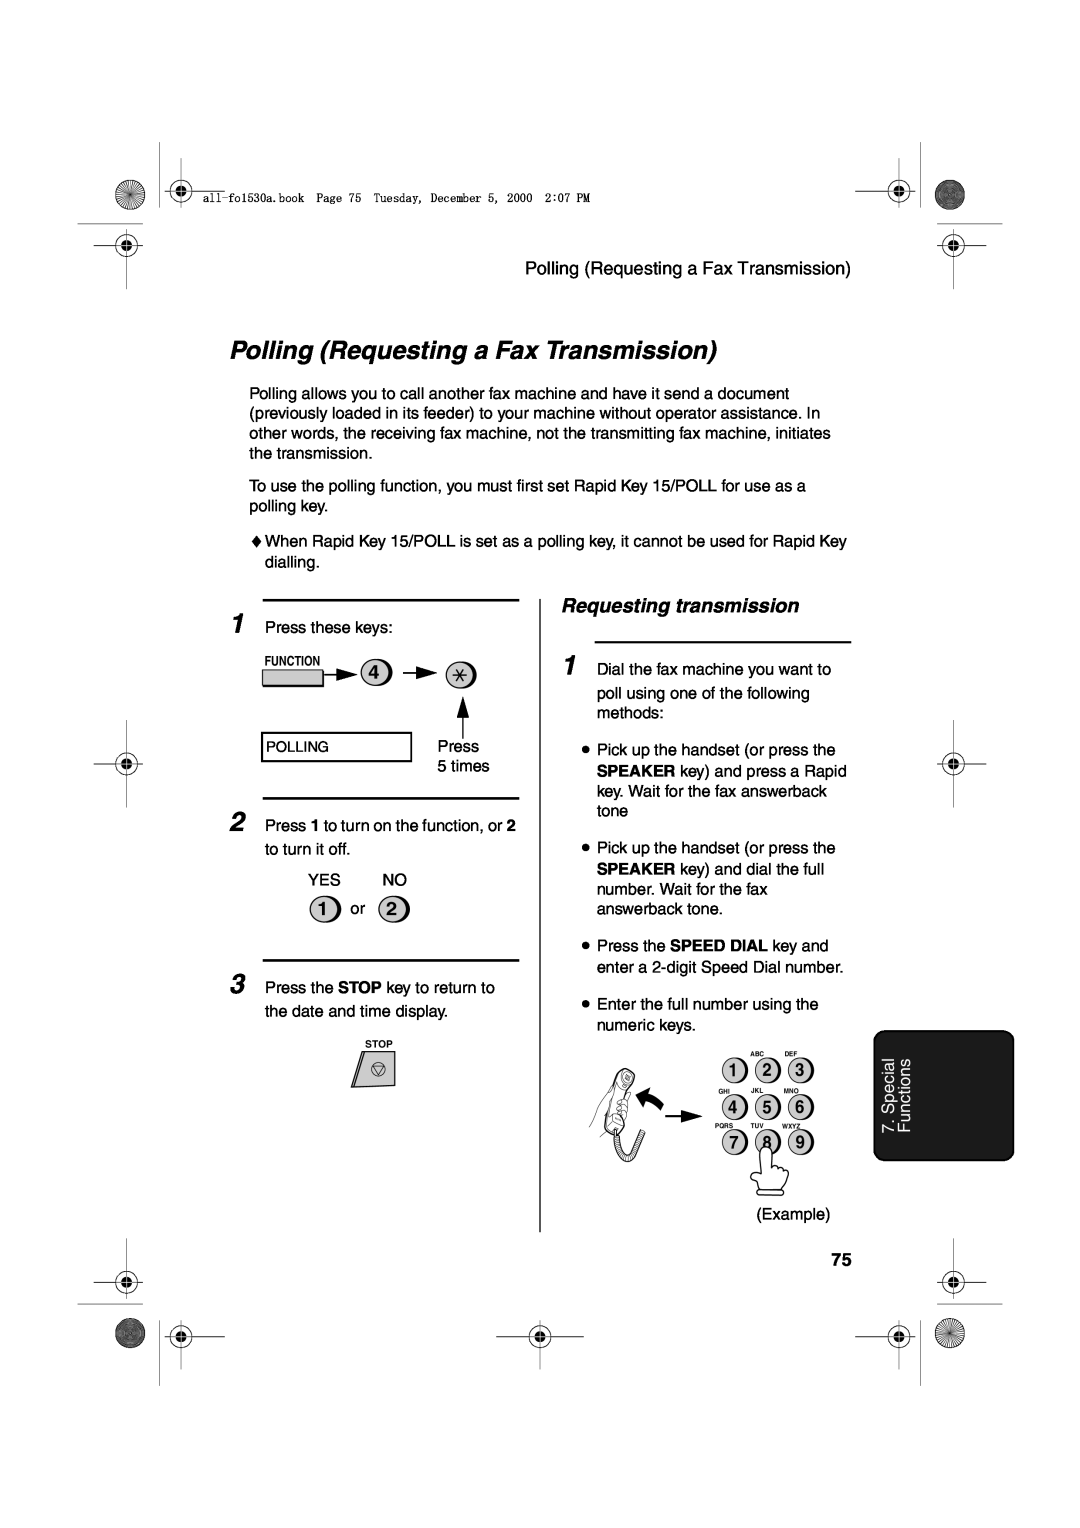 Sharp FO-1530 operation manual Polling Requesting a Fax Transmission, Requesting transmission, 1 or, Special Functions 